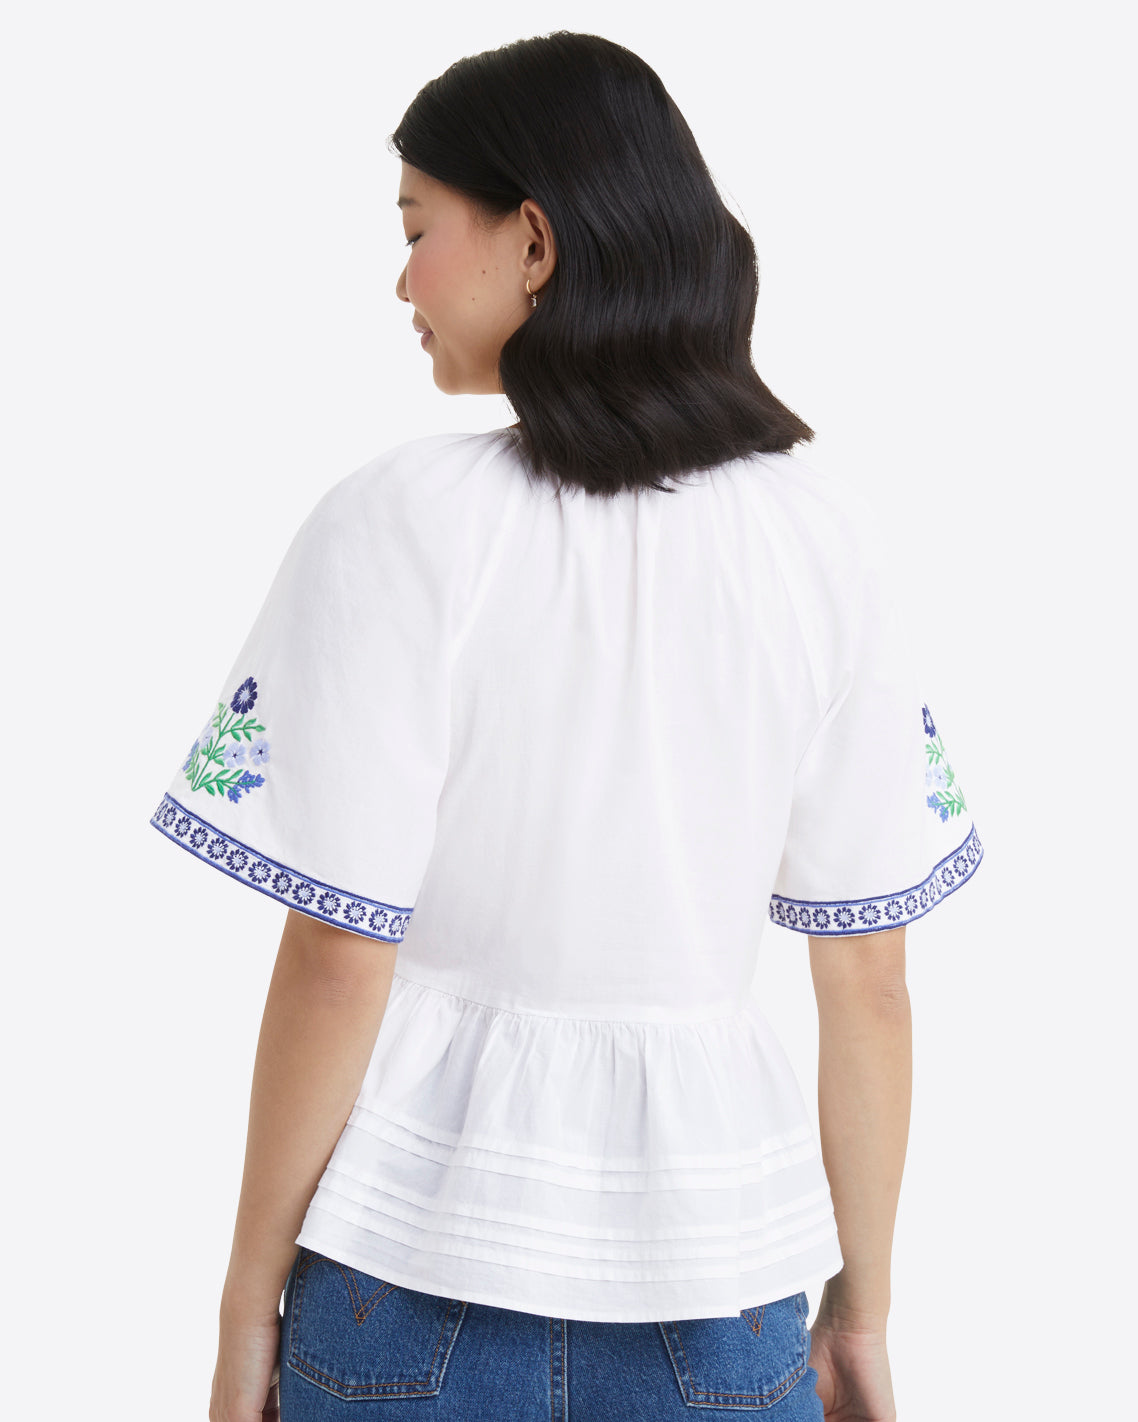 A Breezy Embroidered Eyelet Top for Summer - Jeans and a Teacup